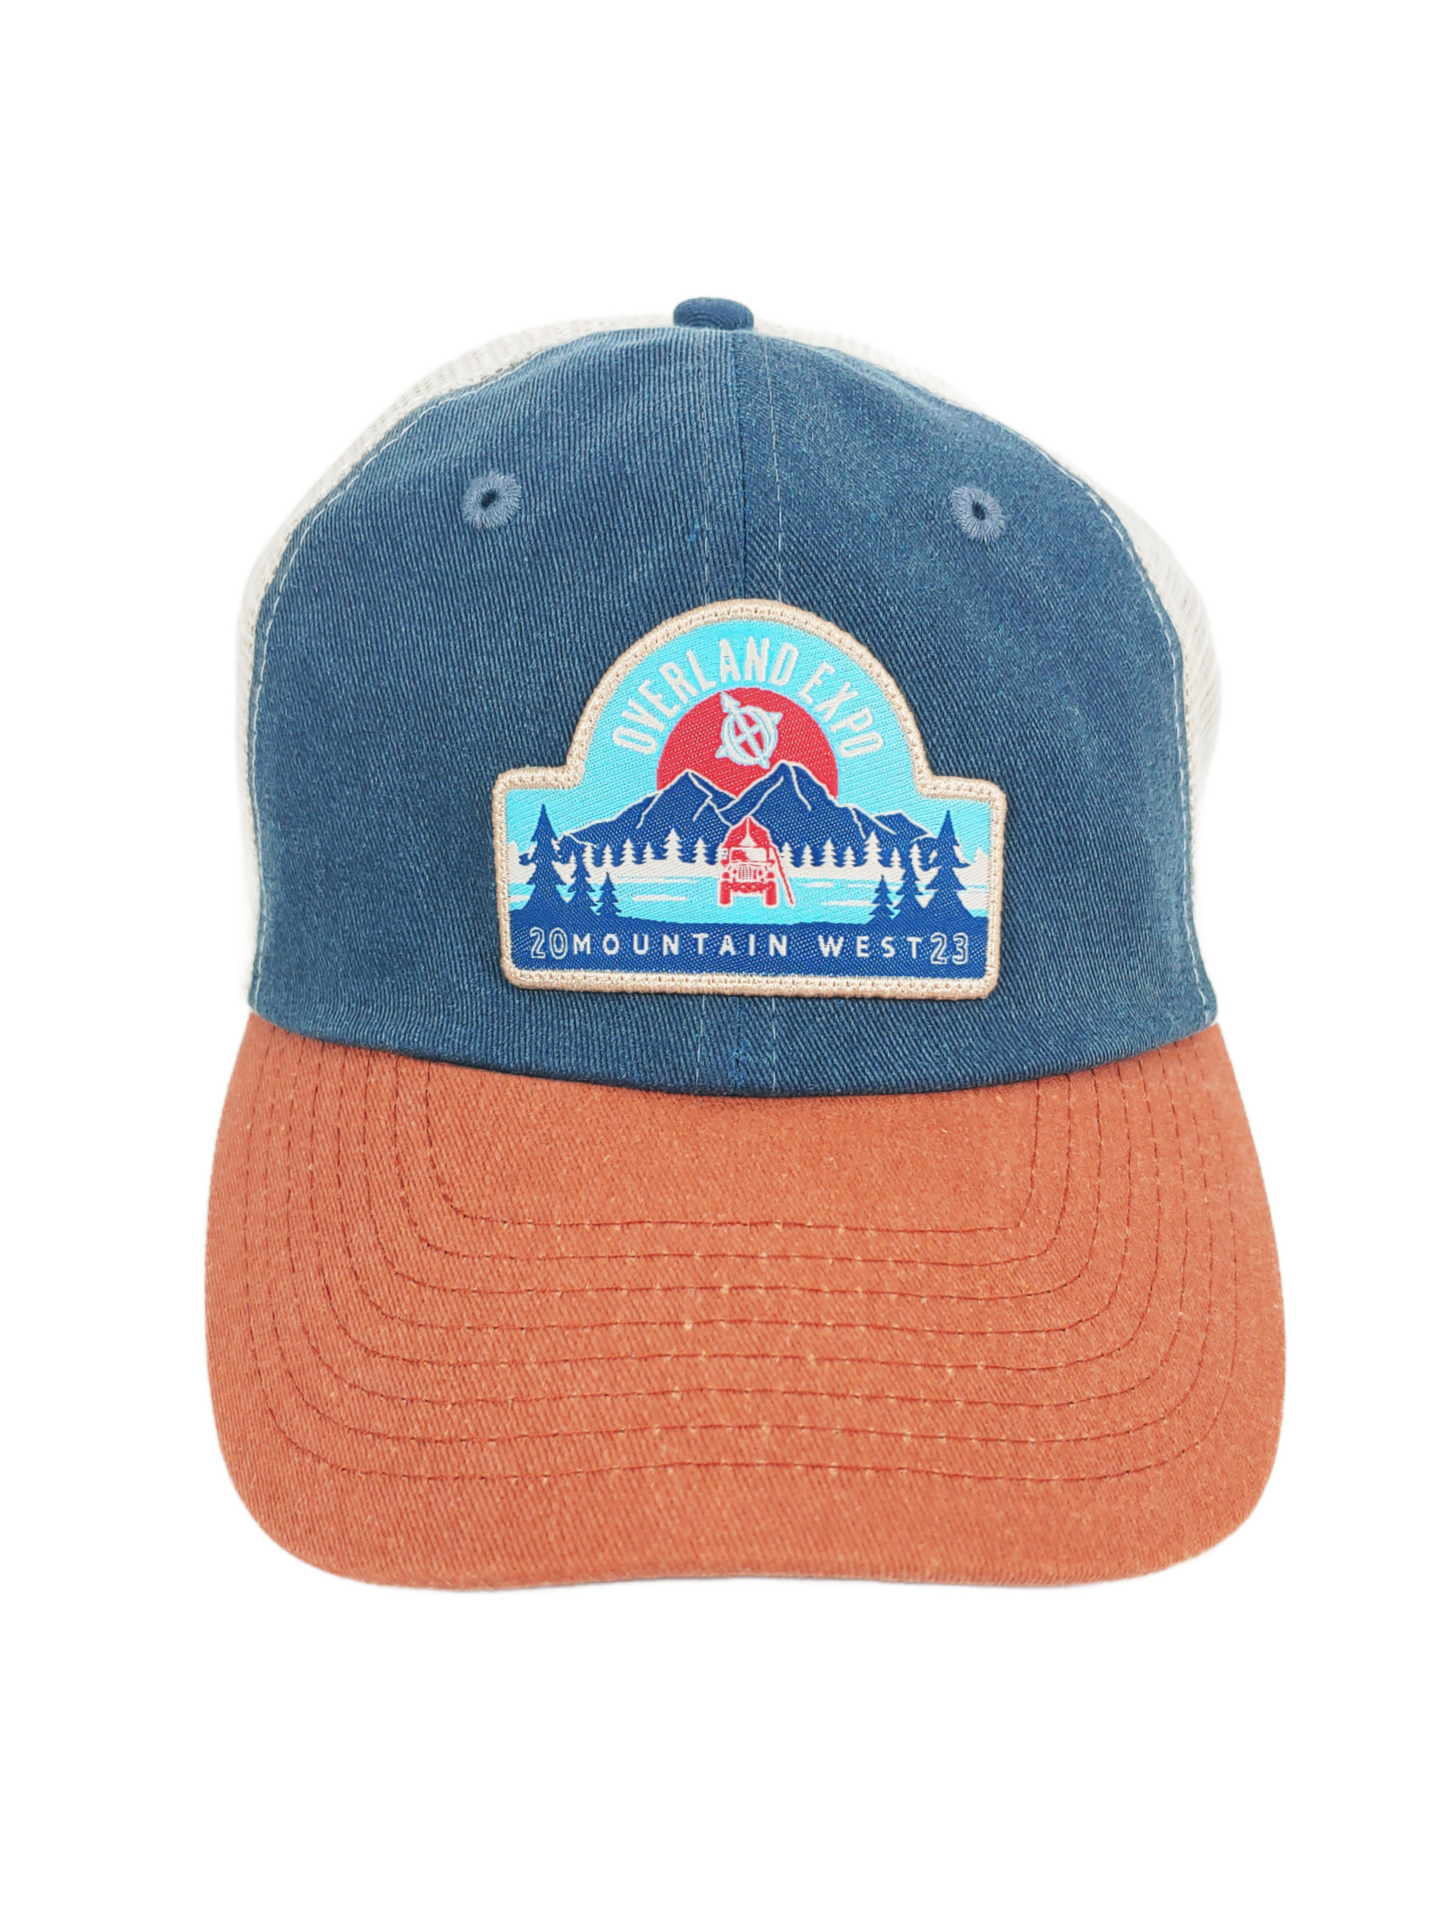 OE Mountain West 2023 - Embroidered Patch - Curved Billed Hat - 3 Styles